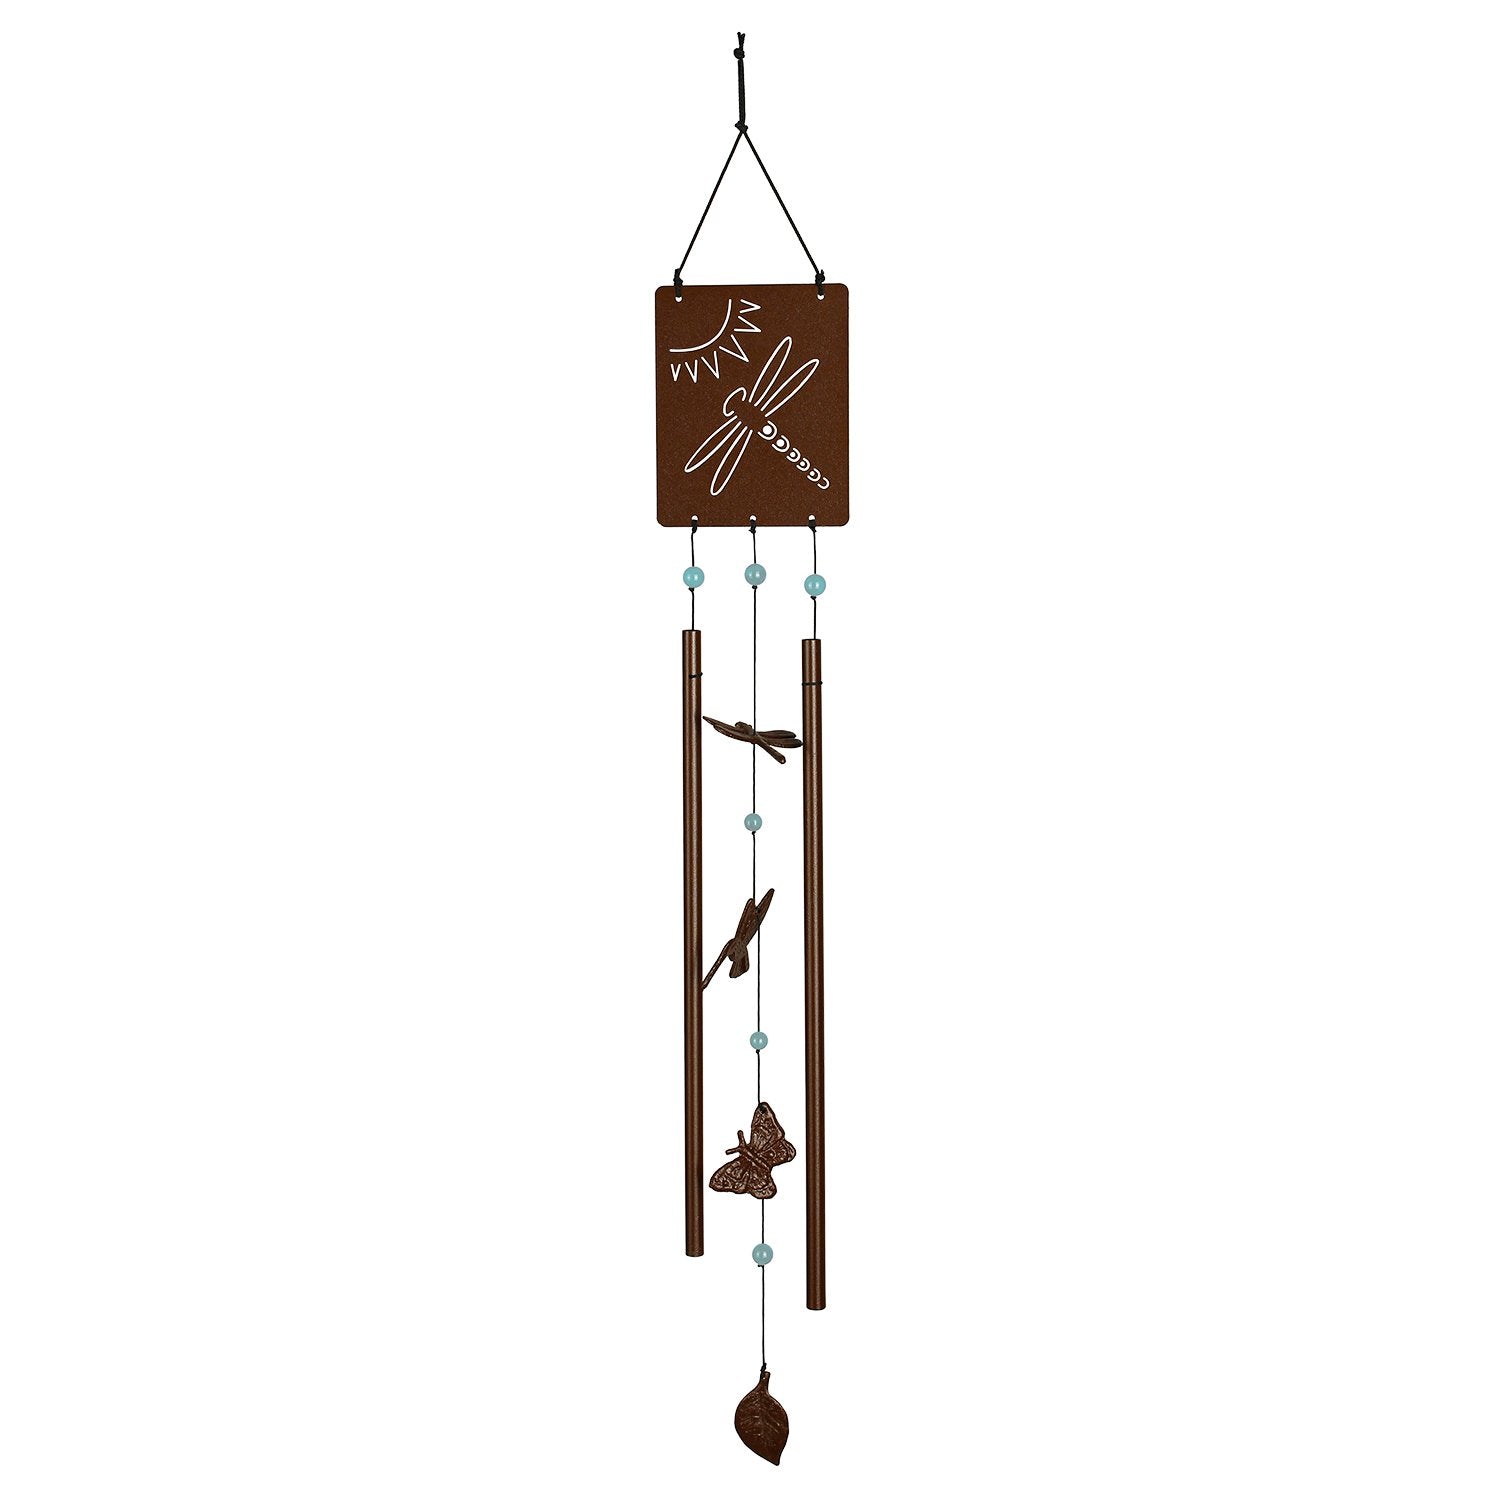 Victorian Garden Chime - Meadow, Small full product image